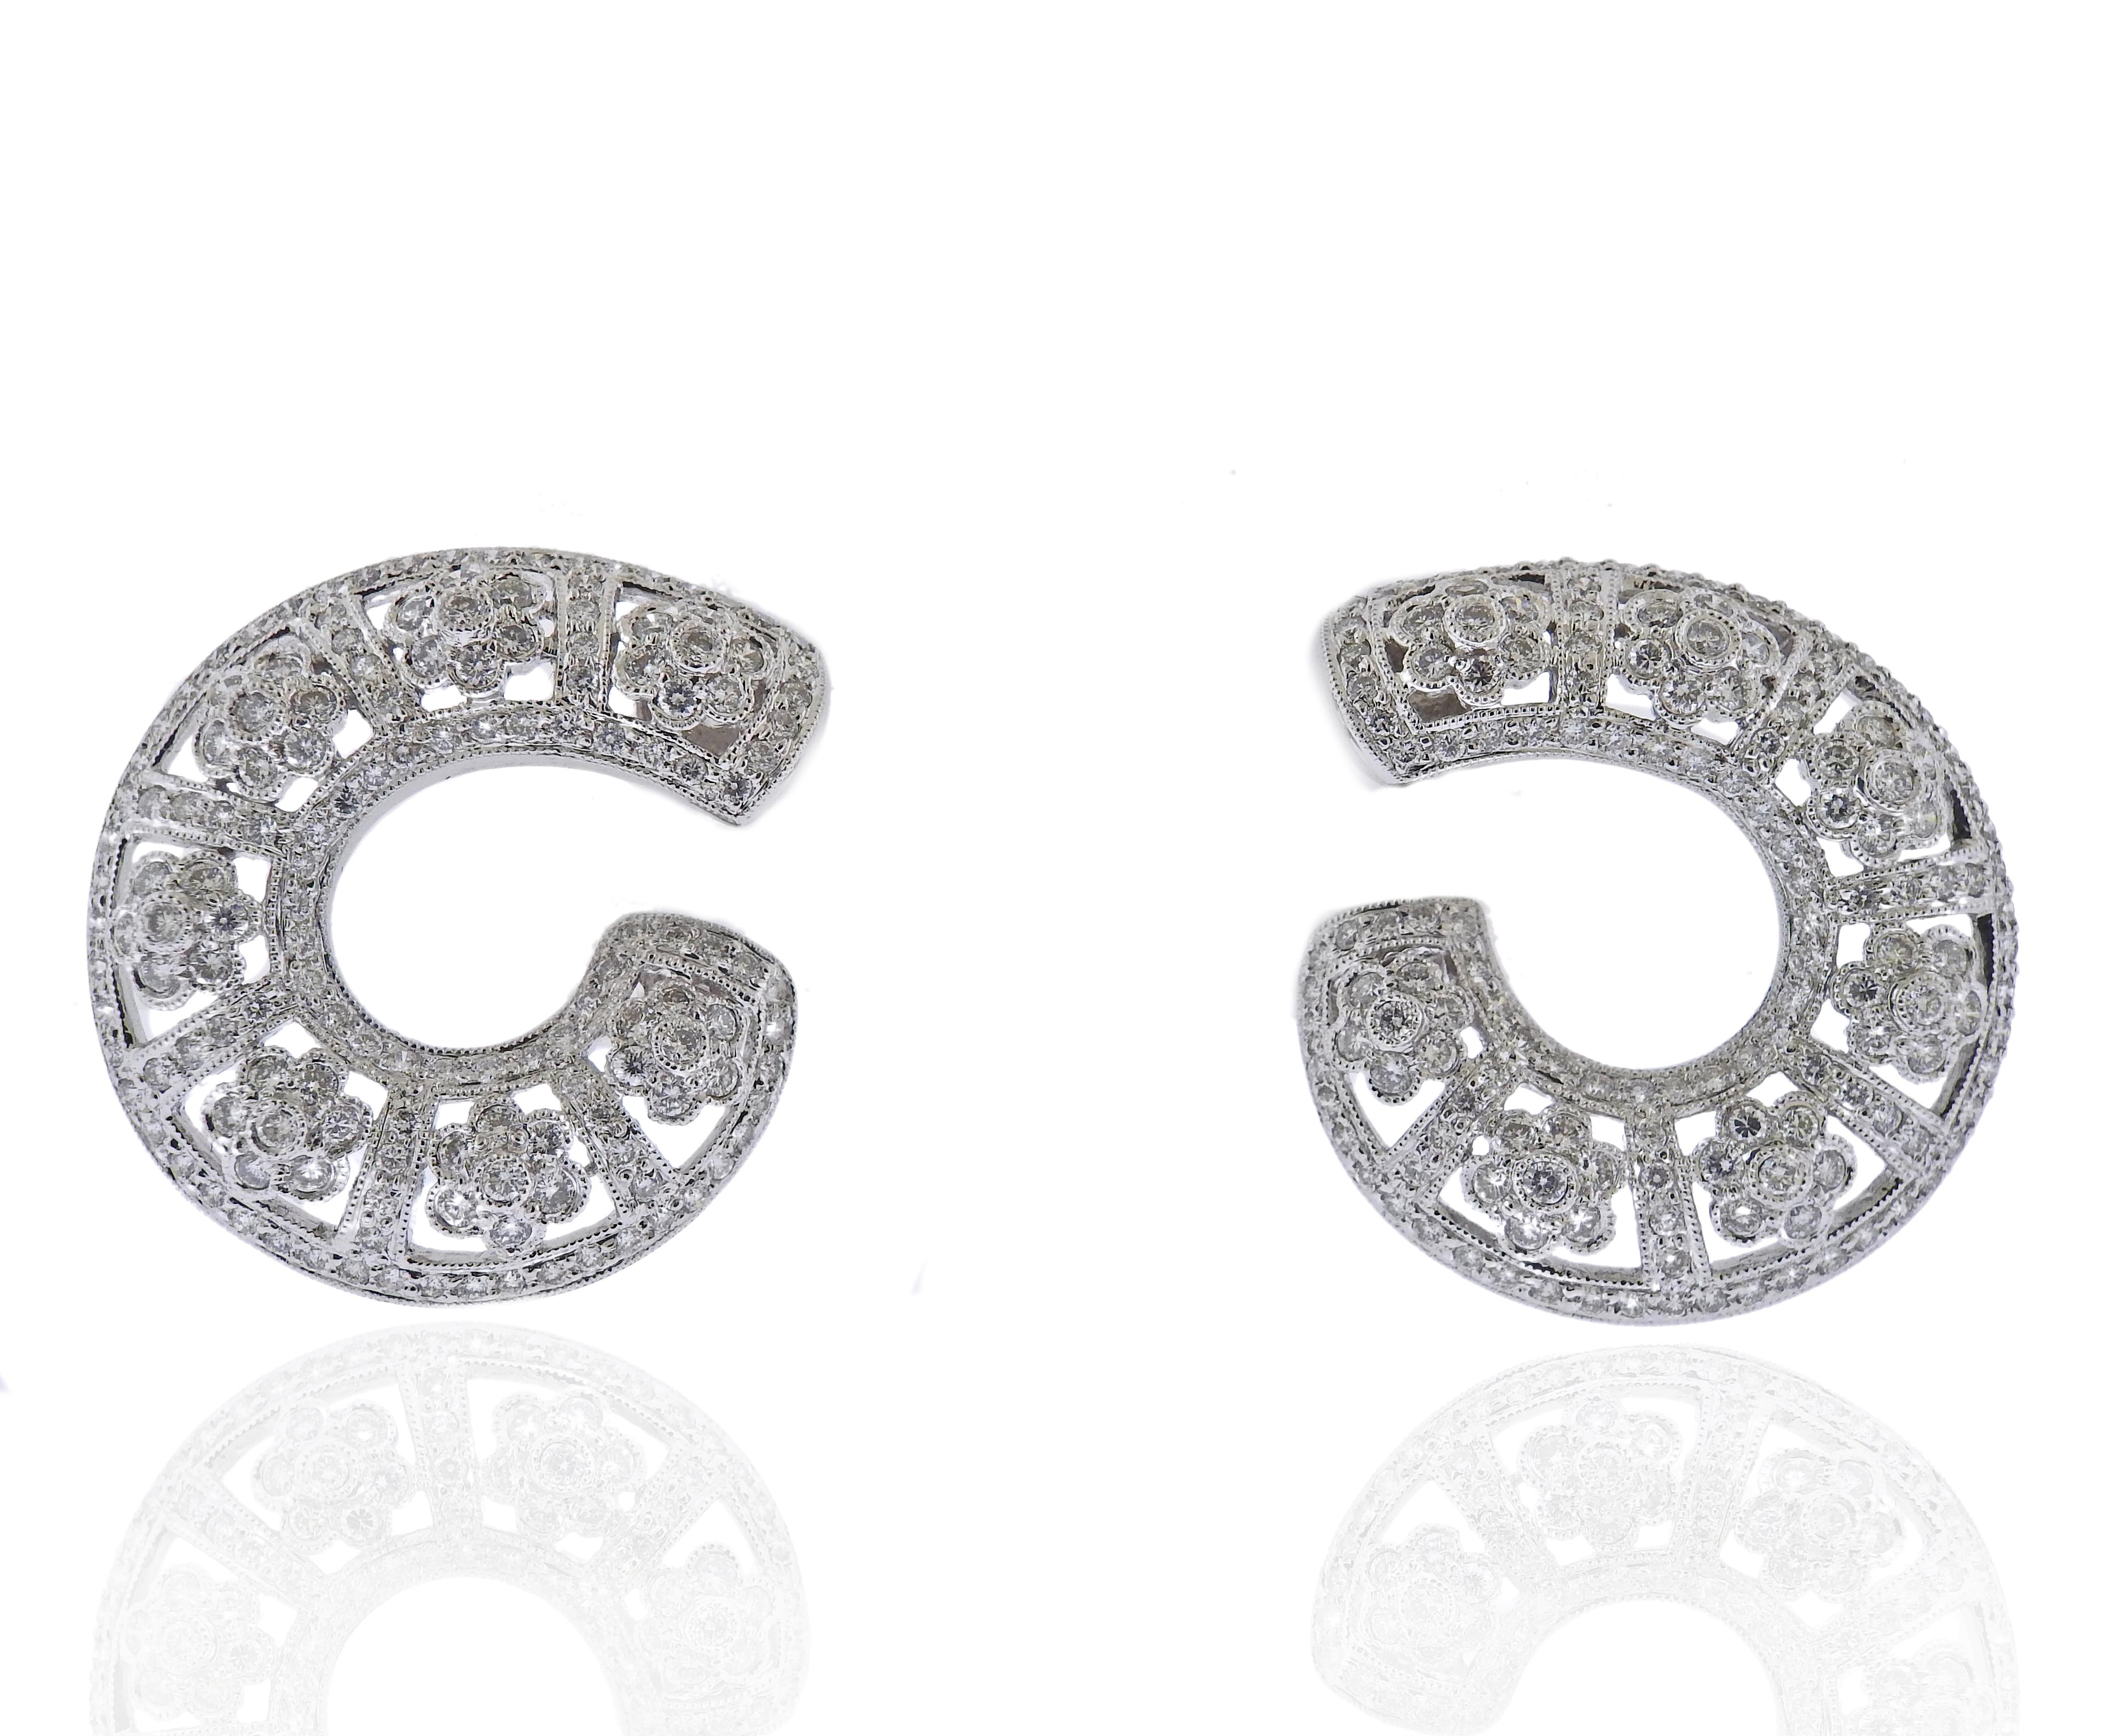 Pair of 14k gold earrings with approx. 1.40ctw in diamonds. Earrings are 32mm x 28mm. Marked 585, Weight 12.5 grams. 